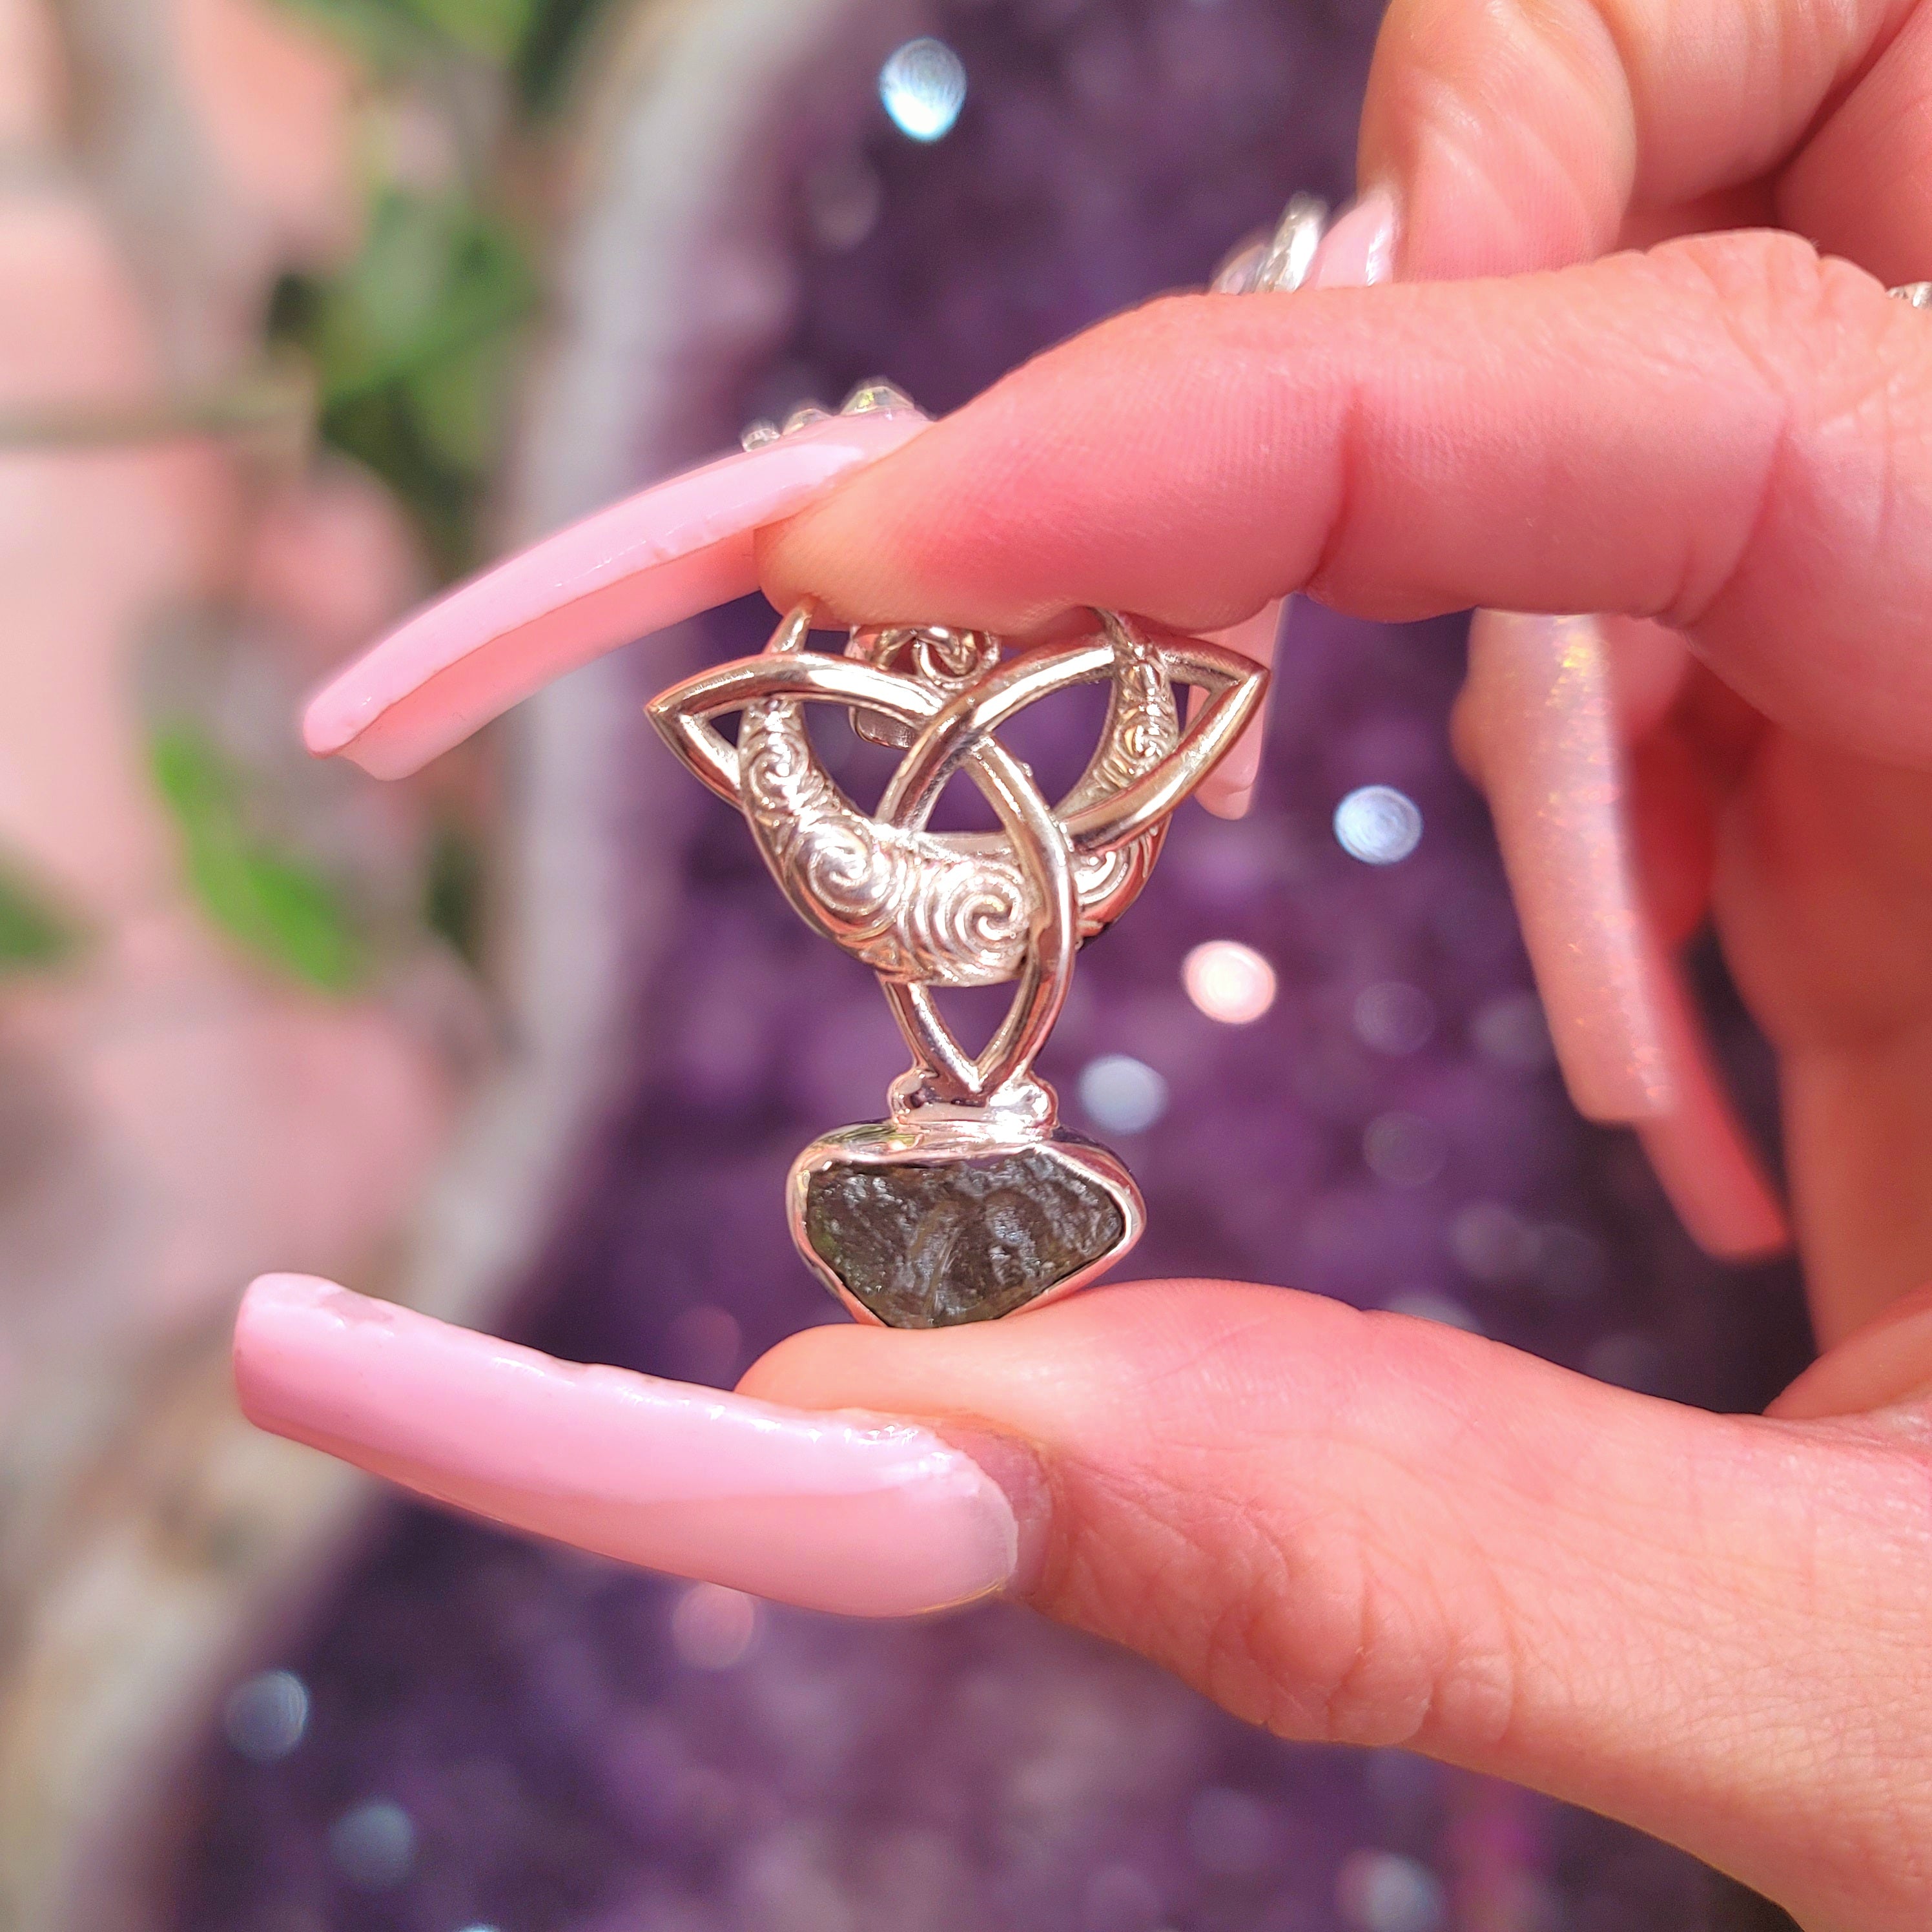 Moldavite Crescent Moon Triquerta .925 Silver Pendant for Transforming your Life and Connection with the Goddess